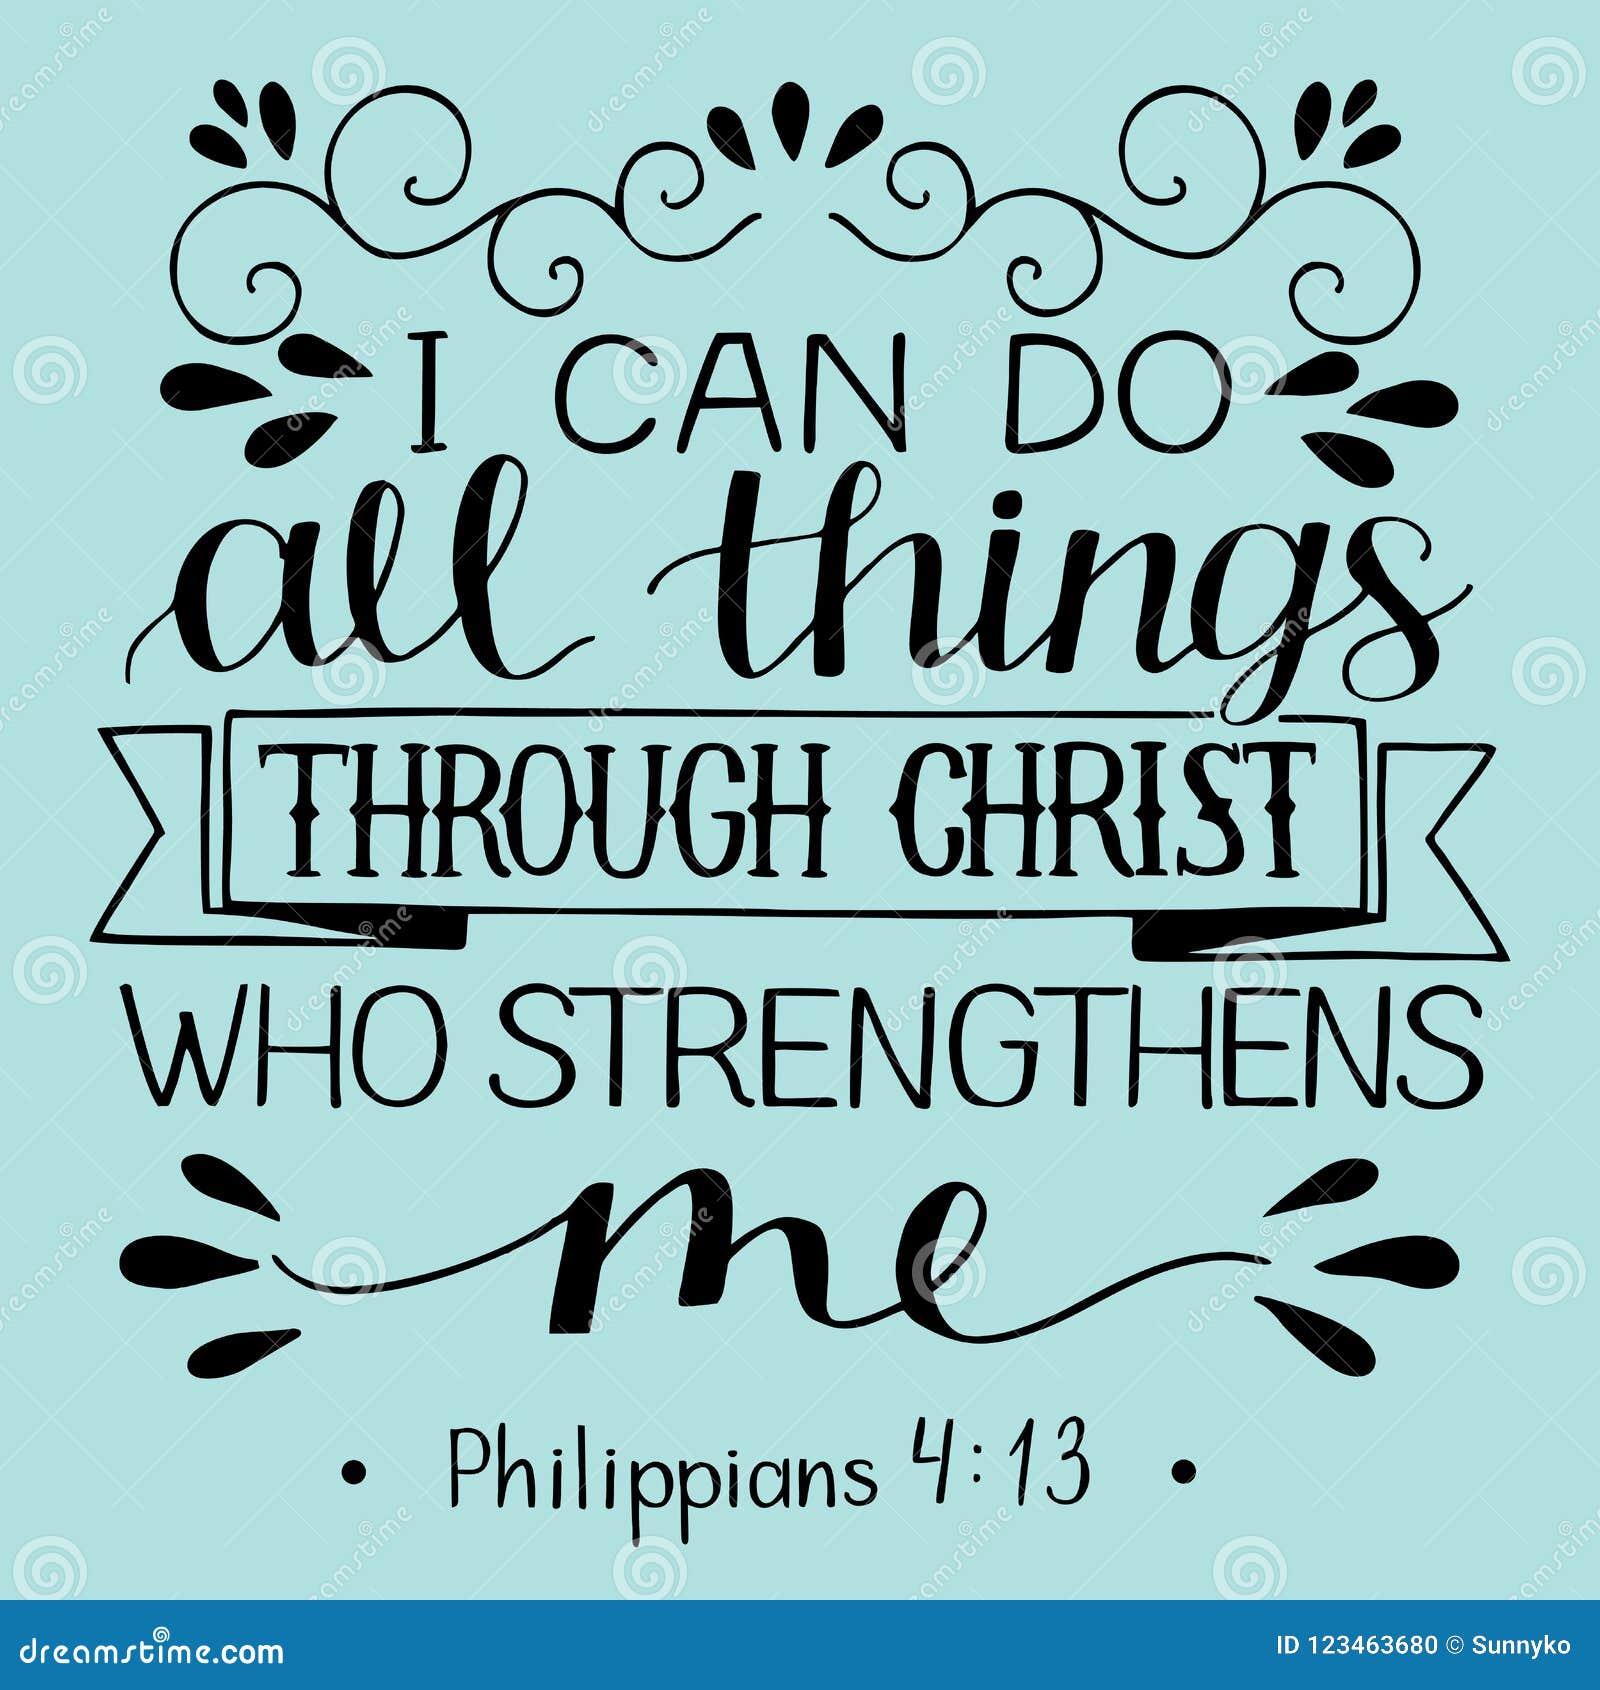 hand lettering with bible verse i can do all things through christ who strengthens me.